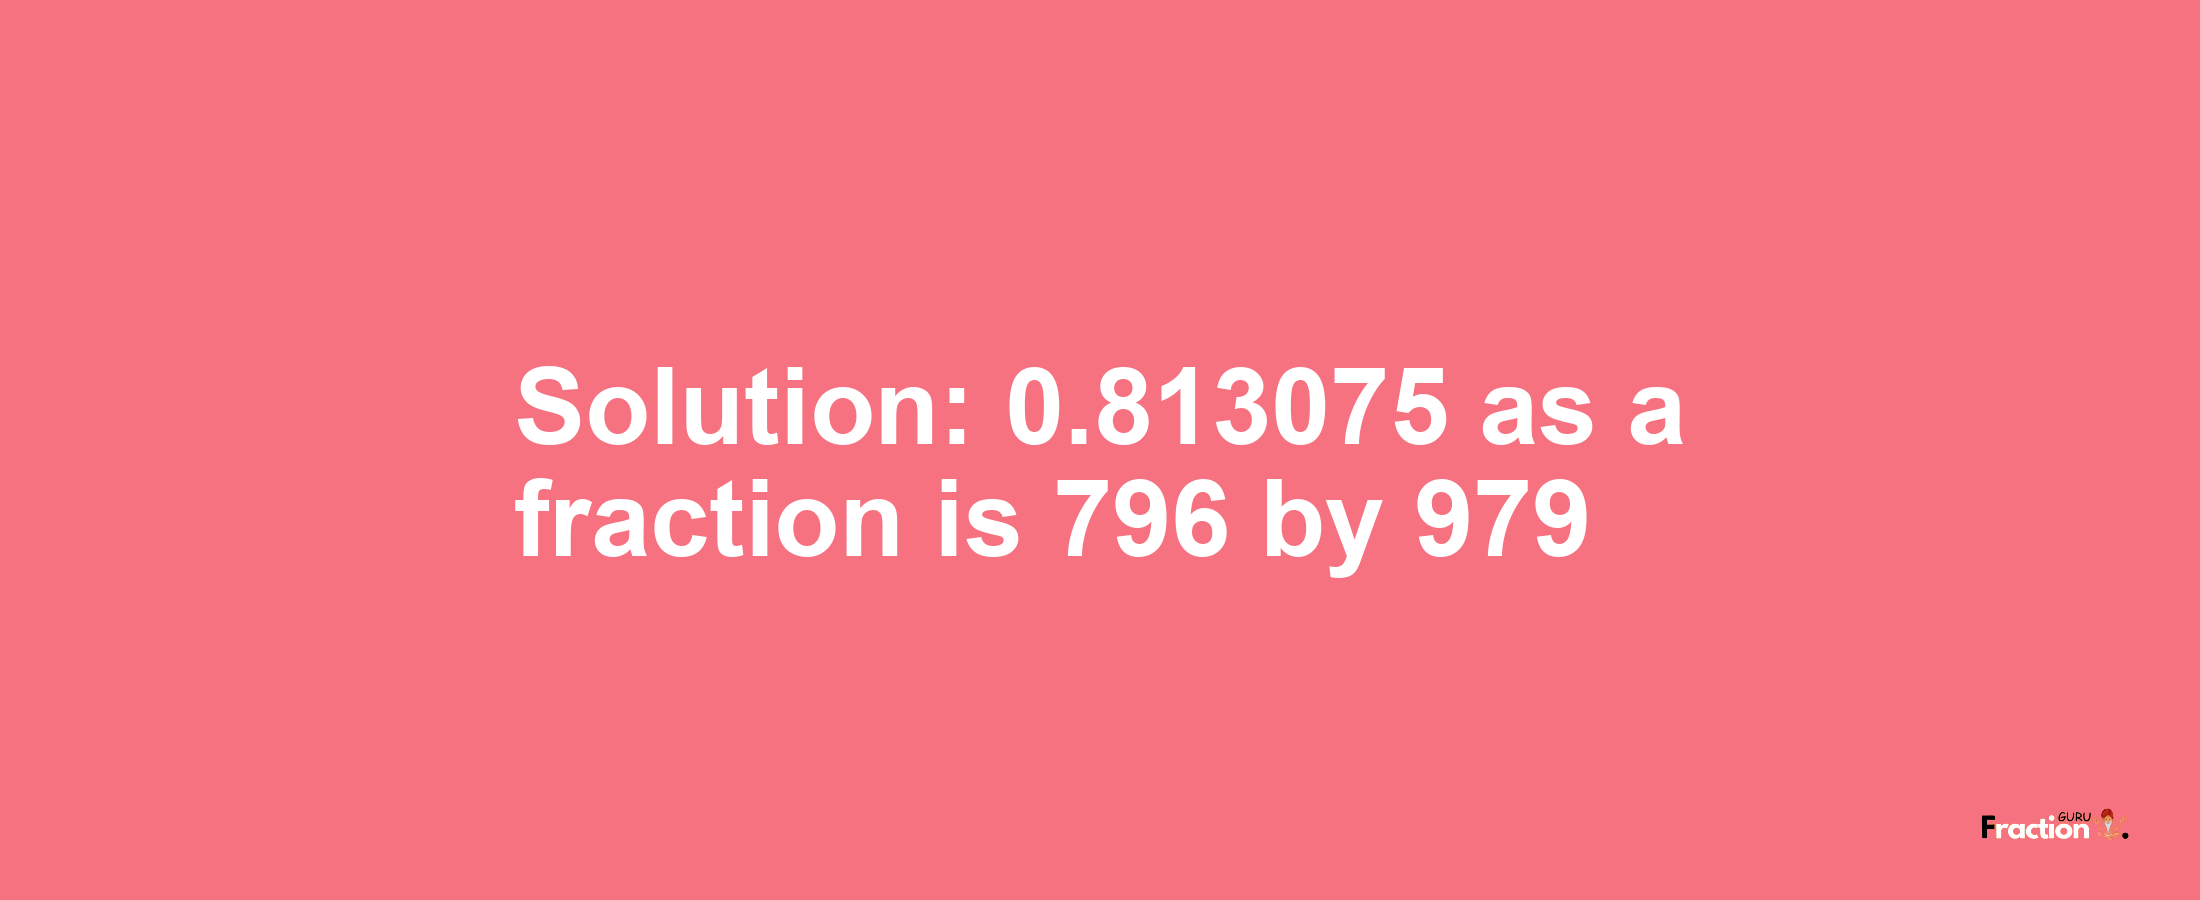 Solution:0.813075 as a fraction is 796/979